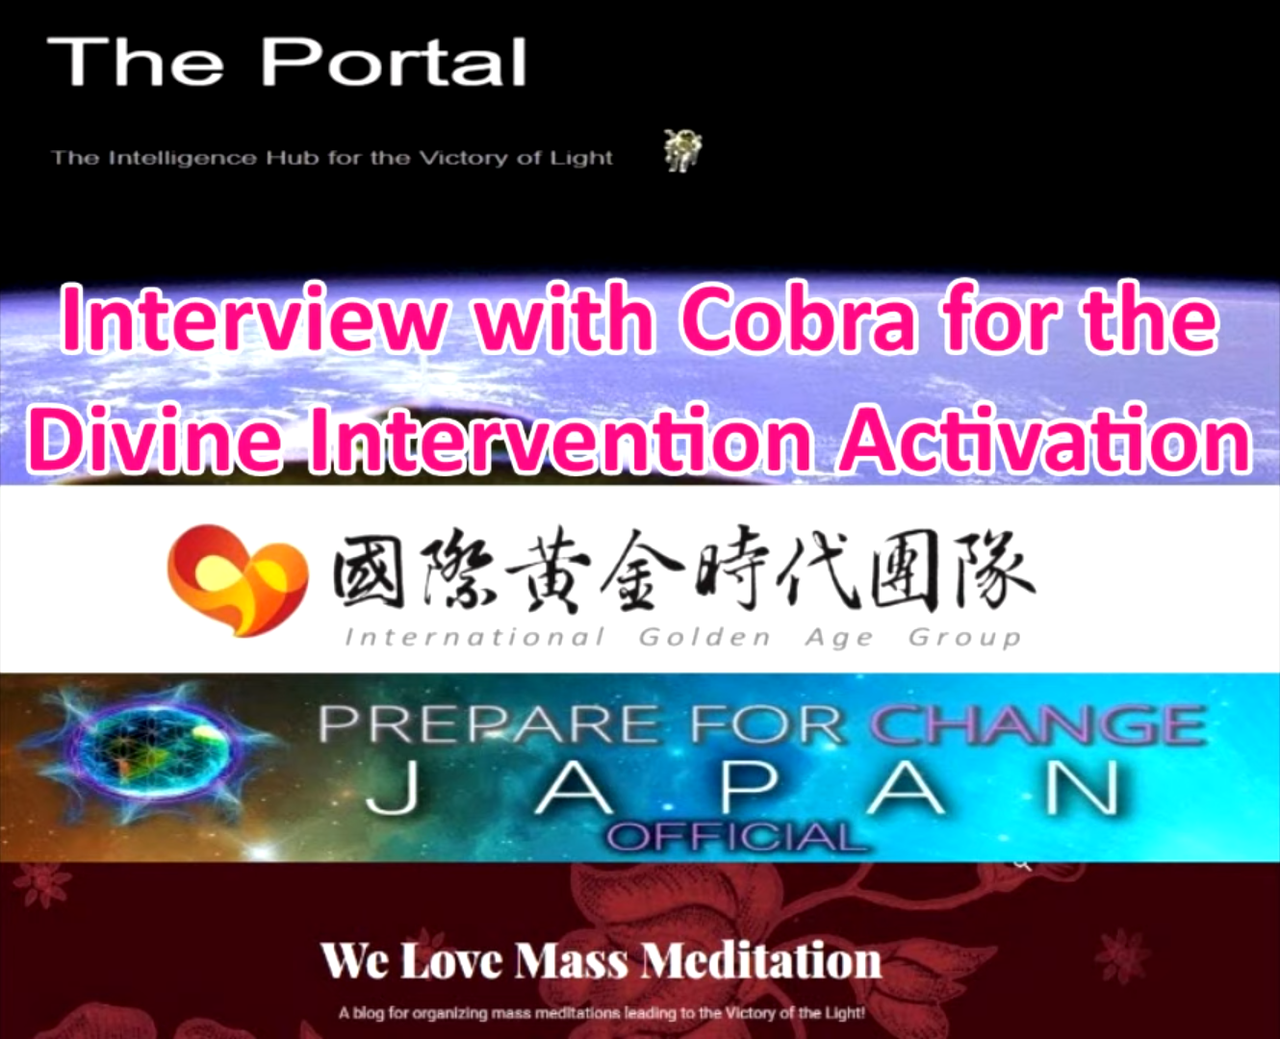 We Love Mass Meditation, International Golden Age Group and Prepare for Change Japan Official